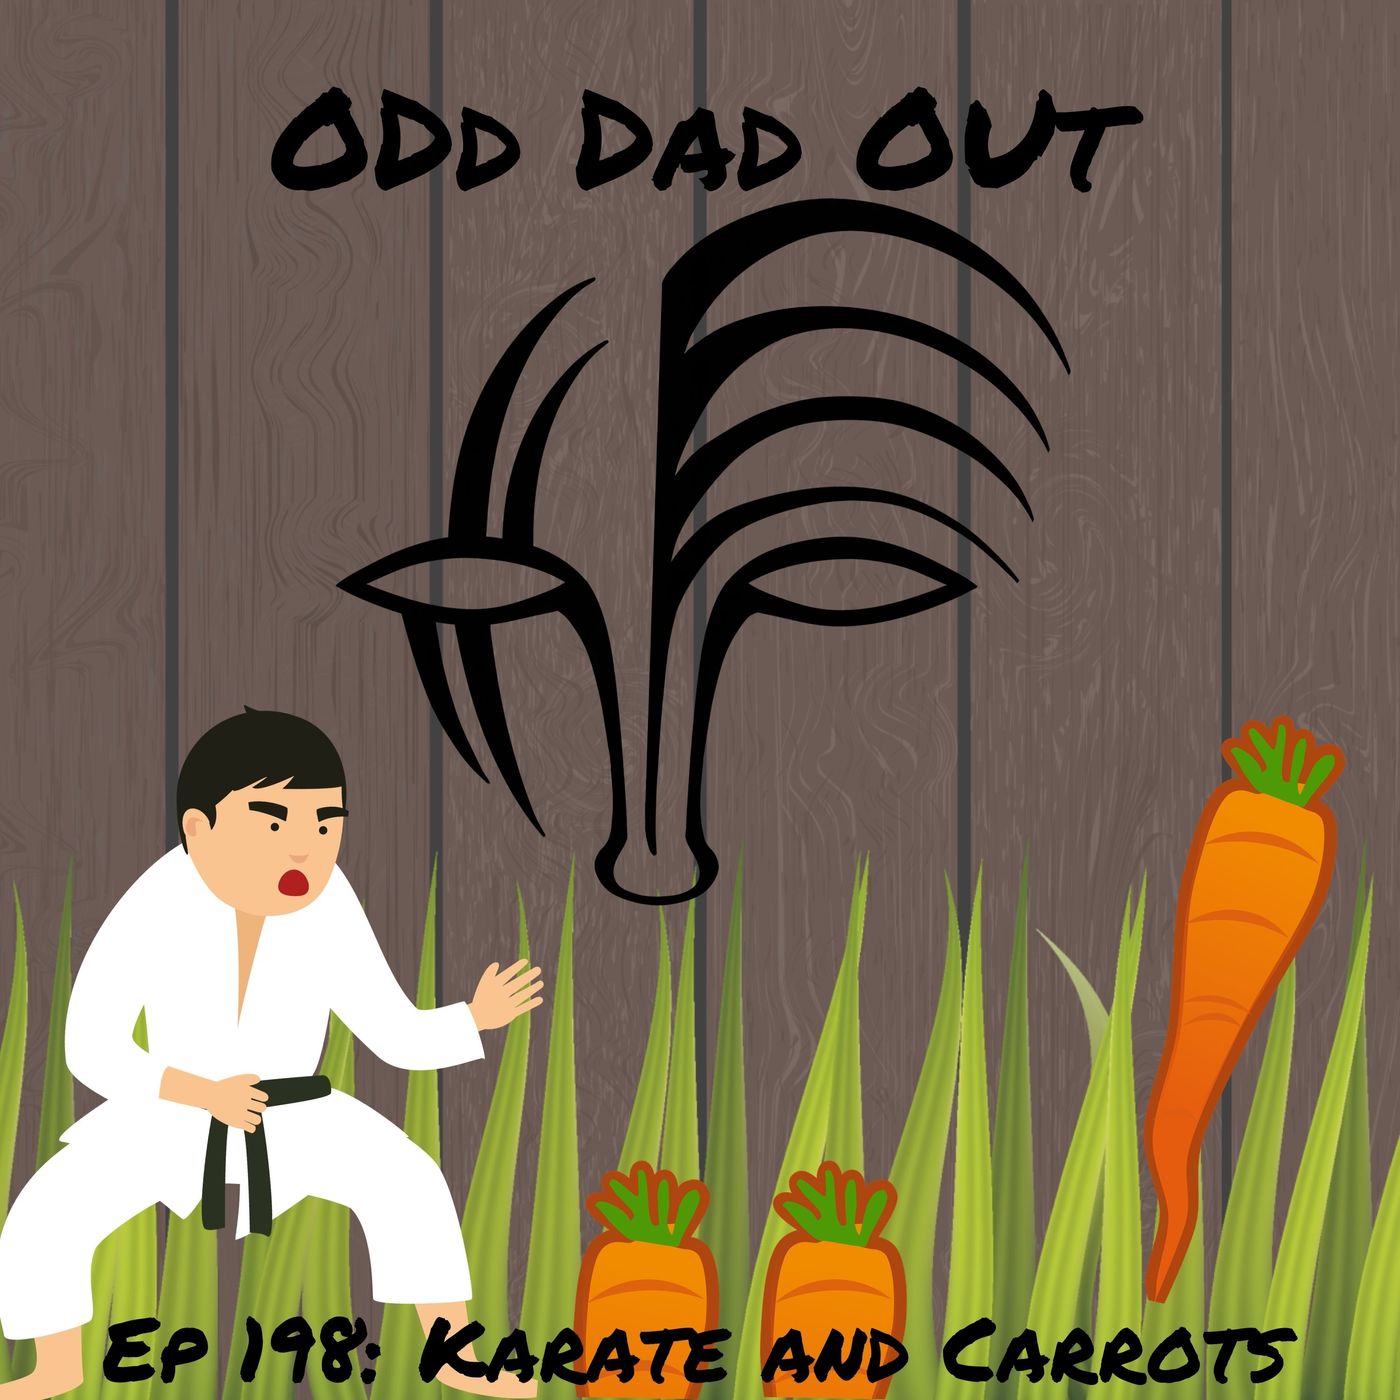 Karate and Carrots: ODO 198